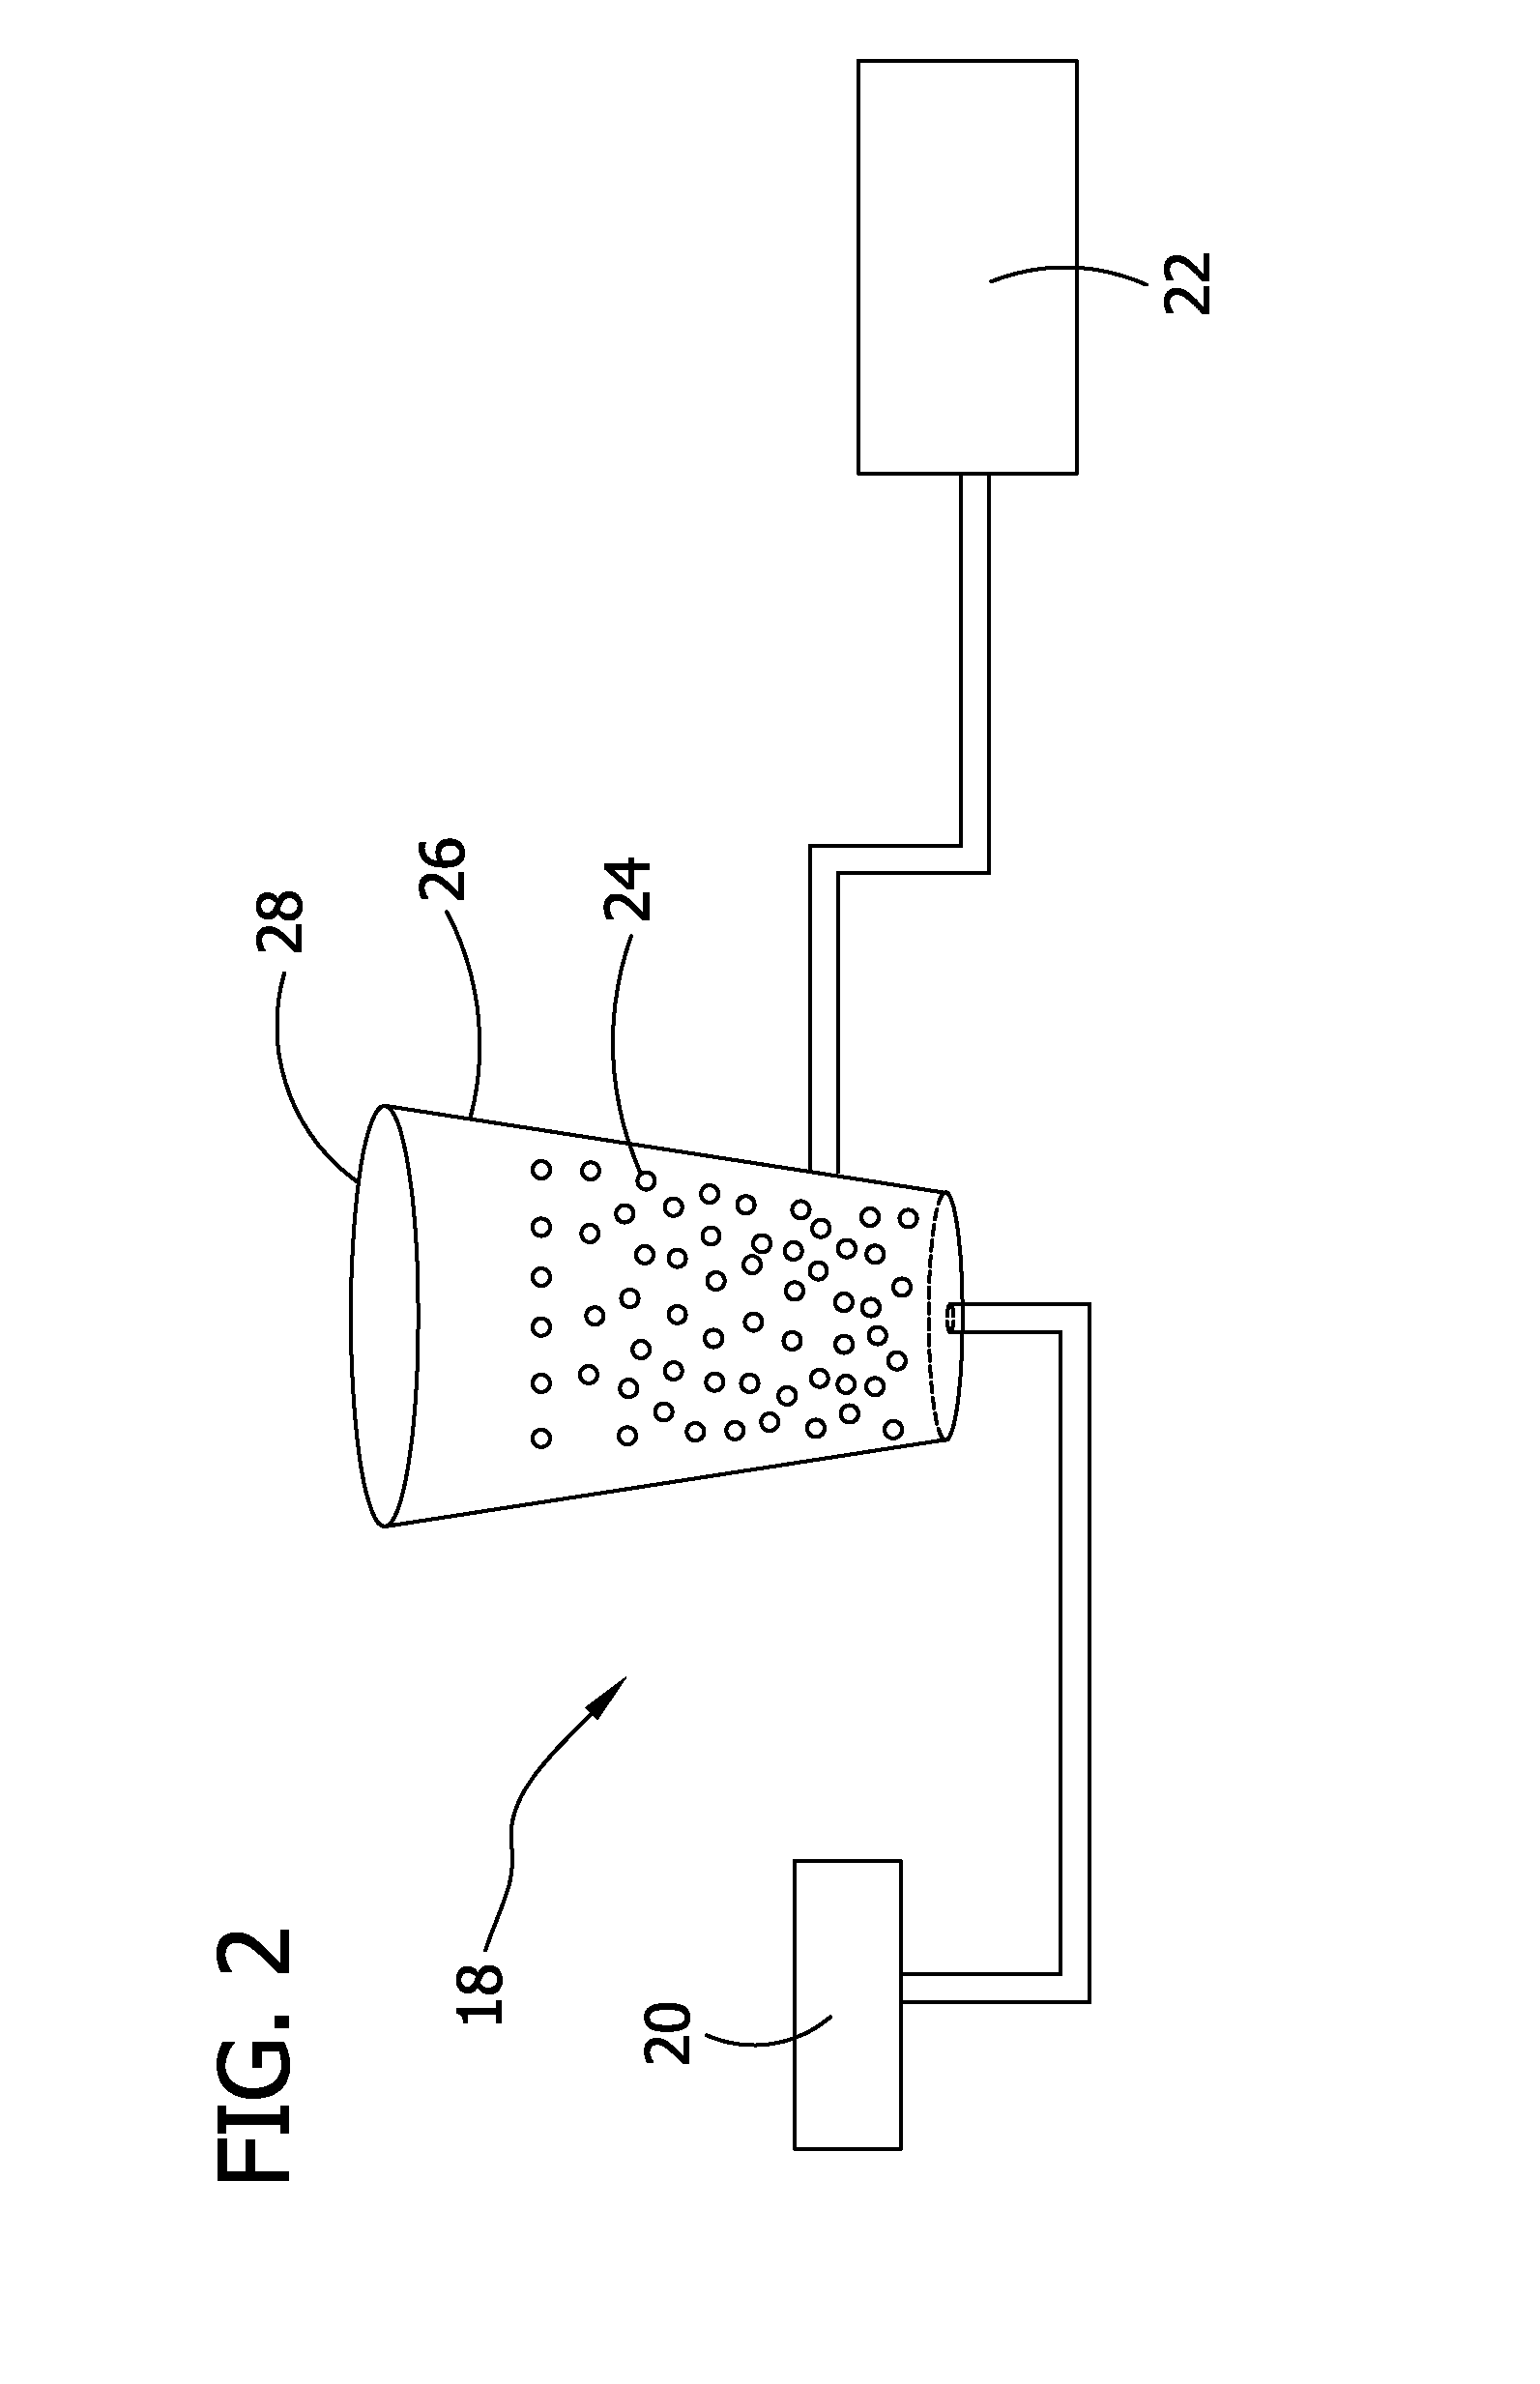 Method of Manufacturing Self-Warming Products